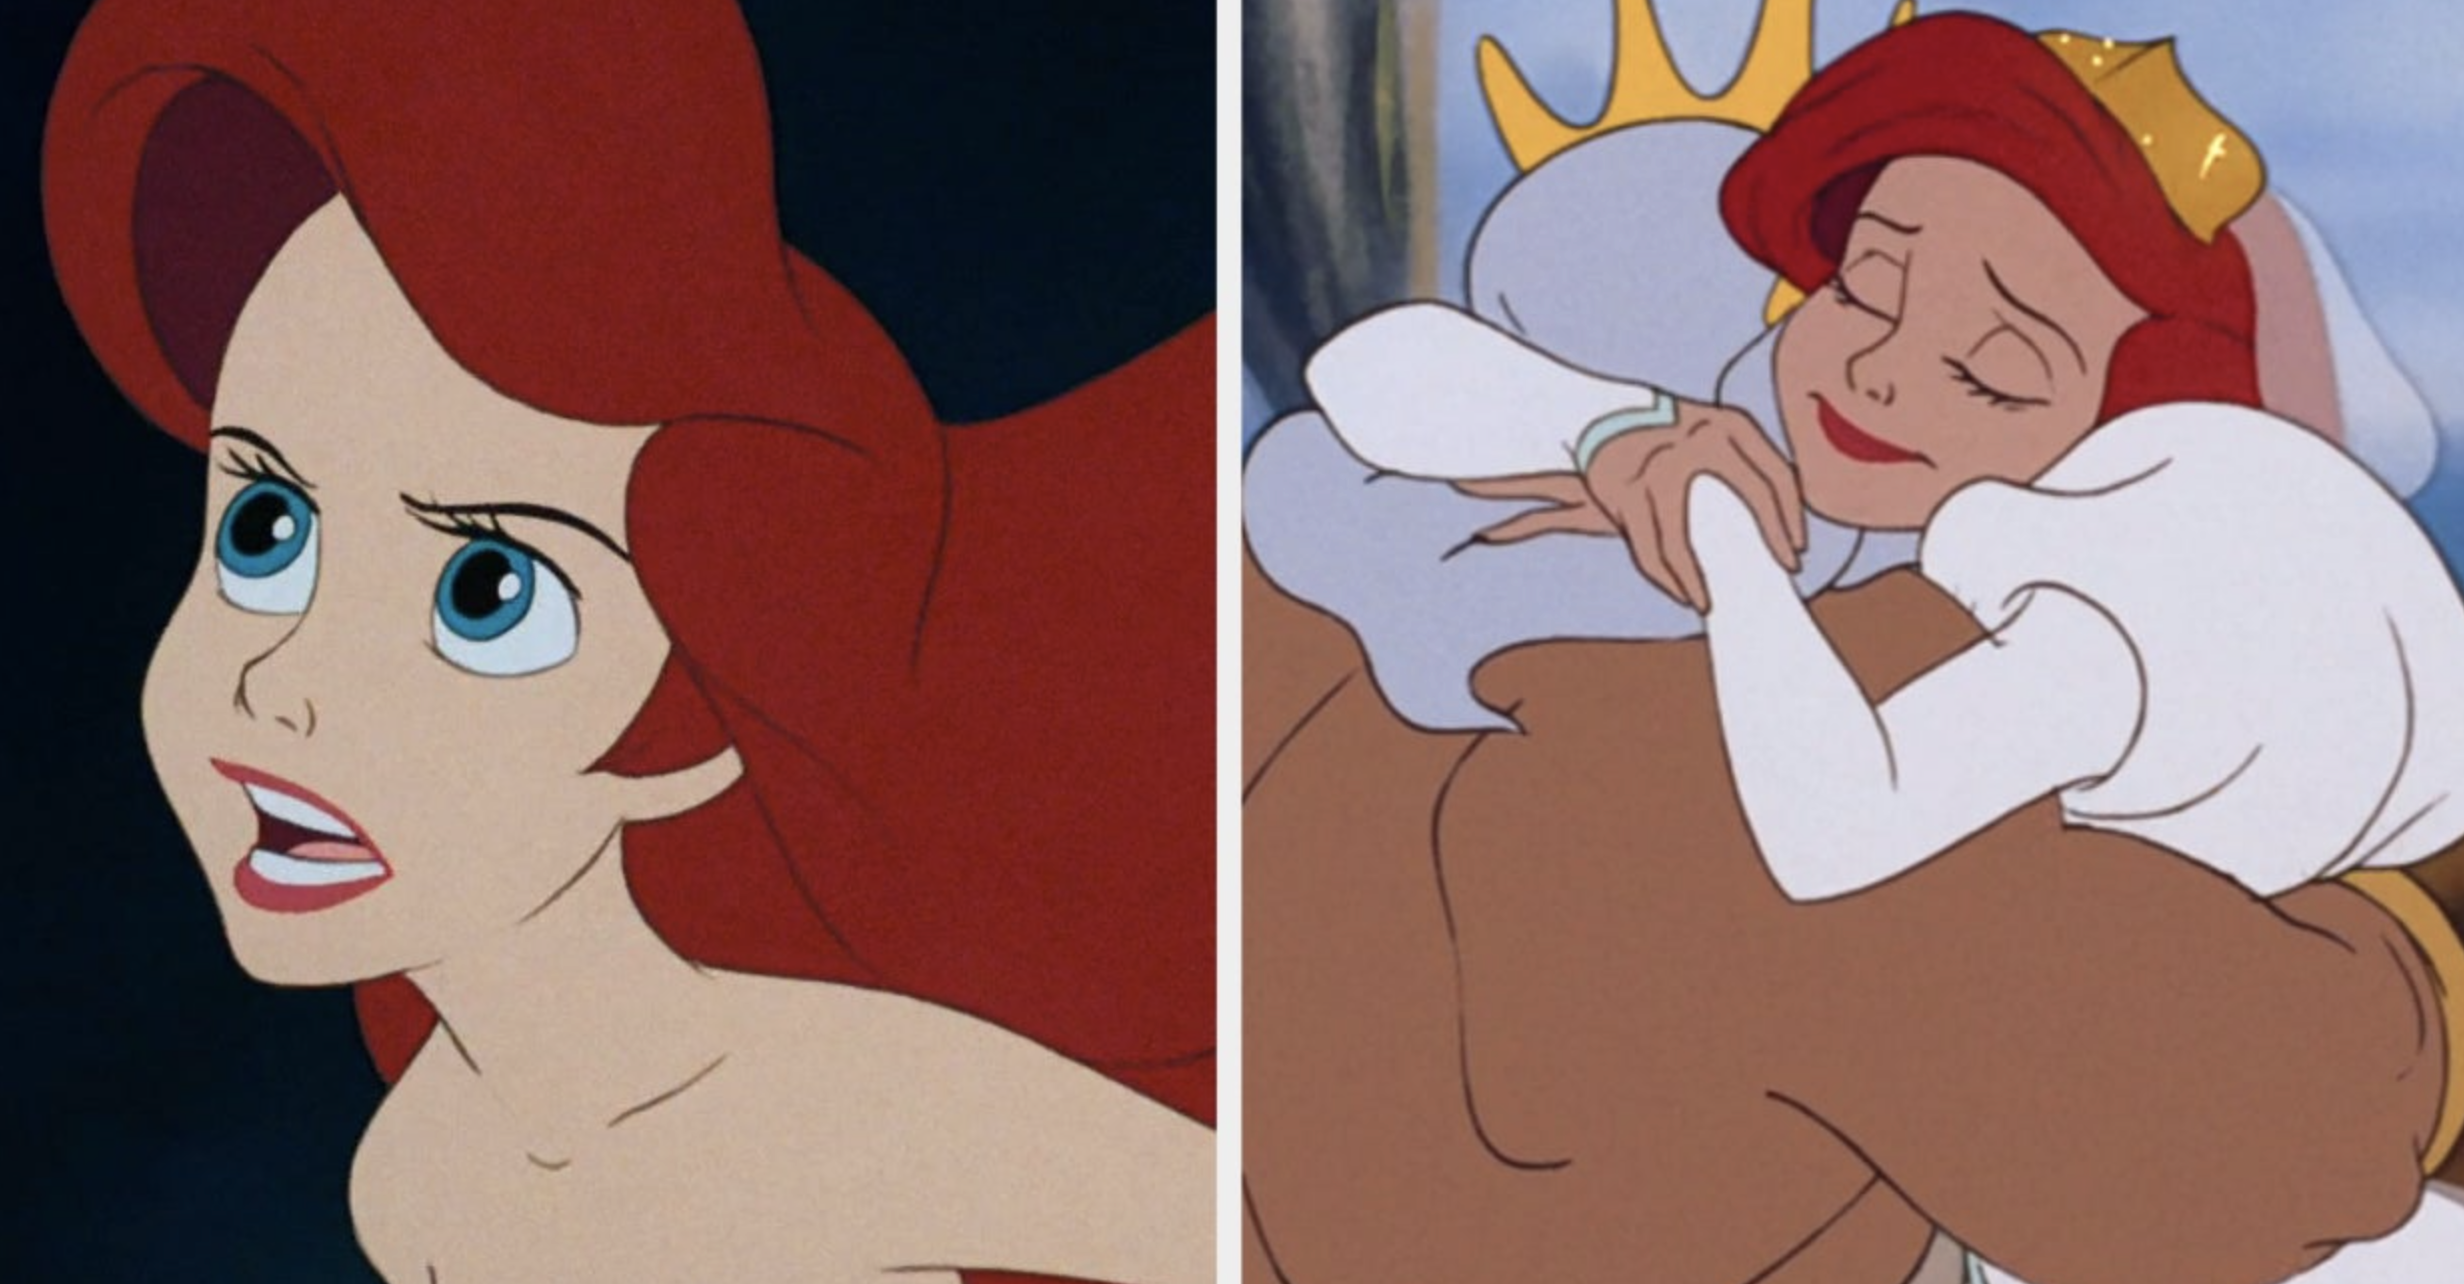 two images: on the left is animated ariel, on the right is animated king triton